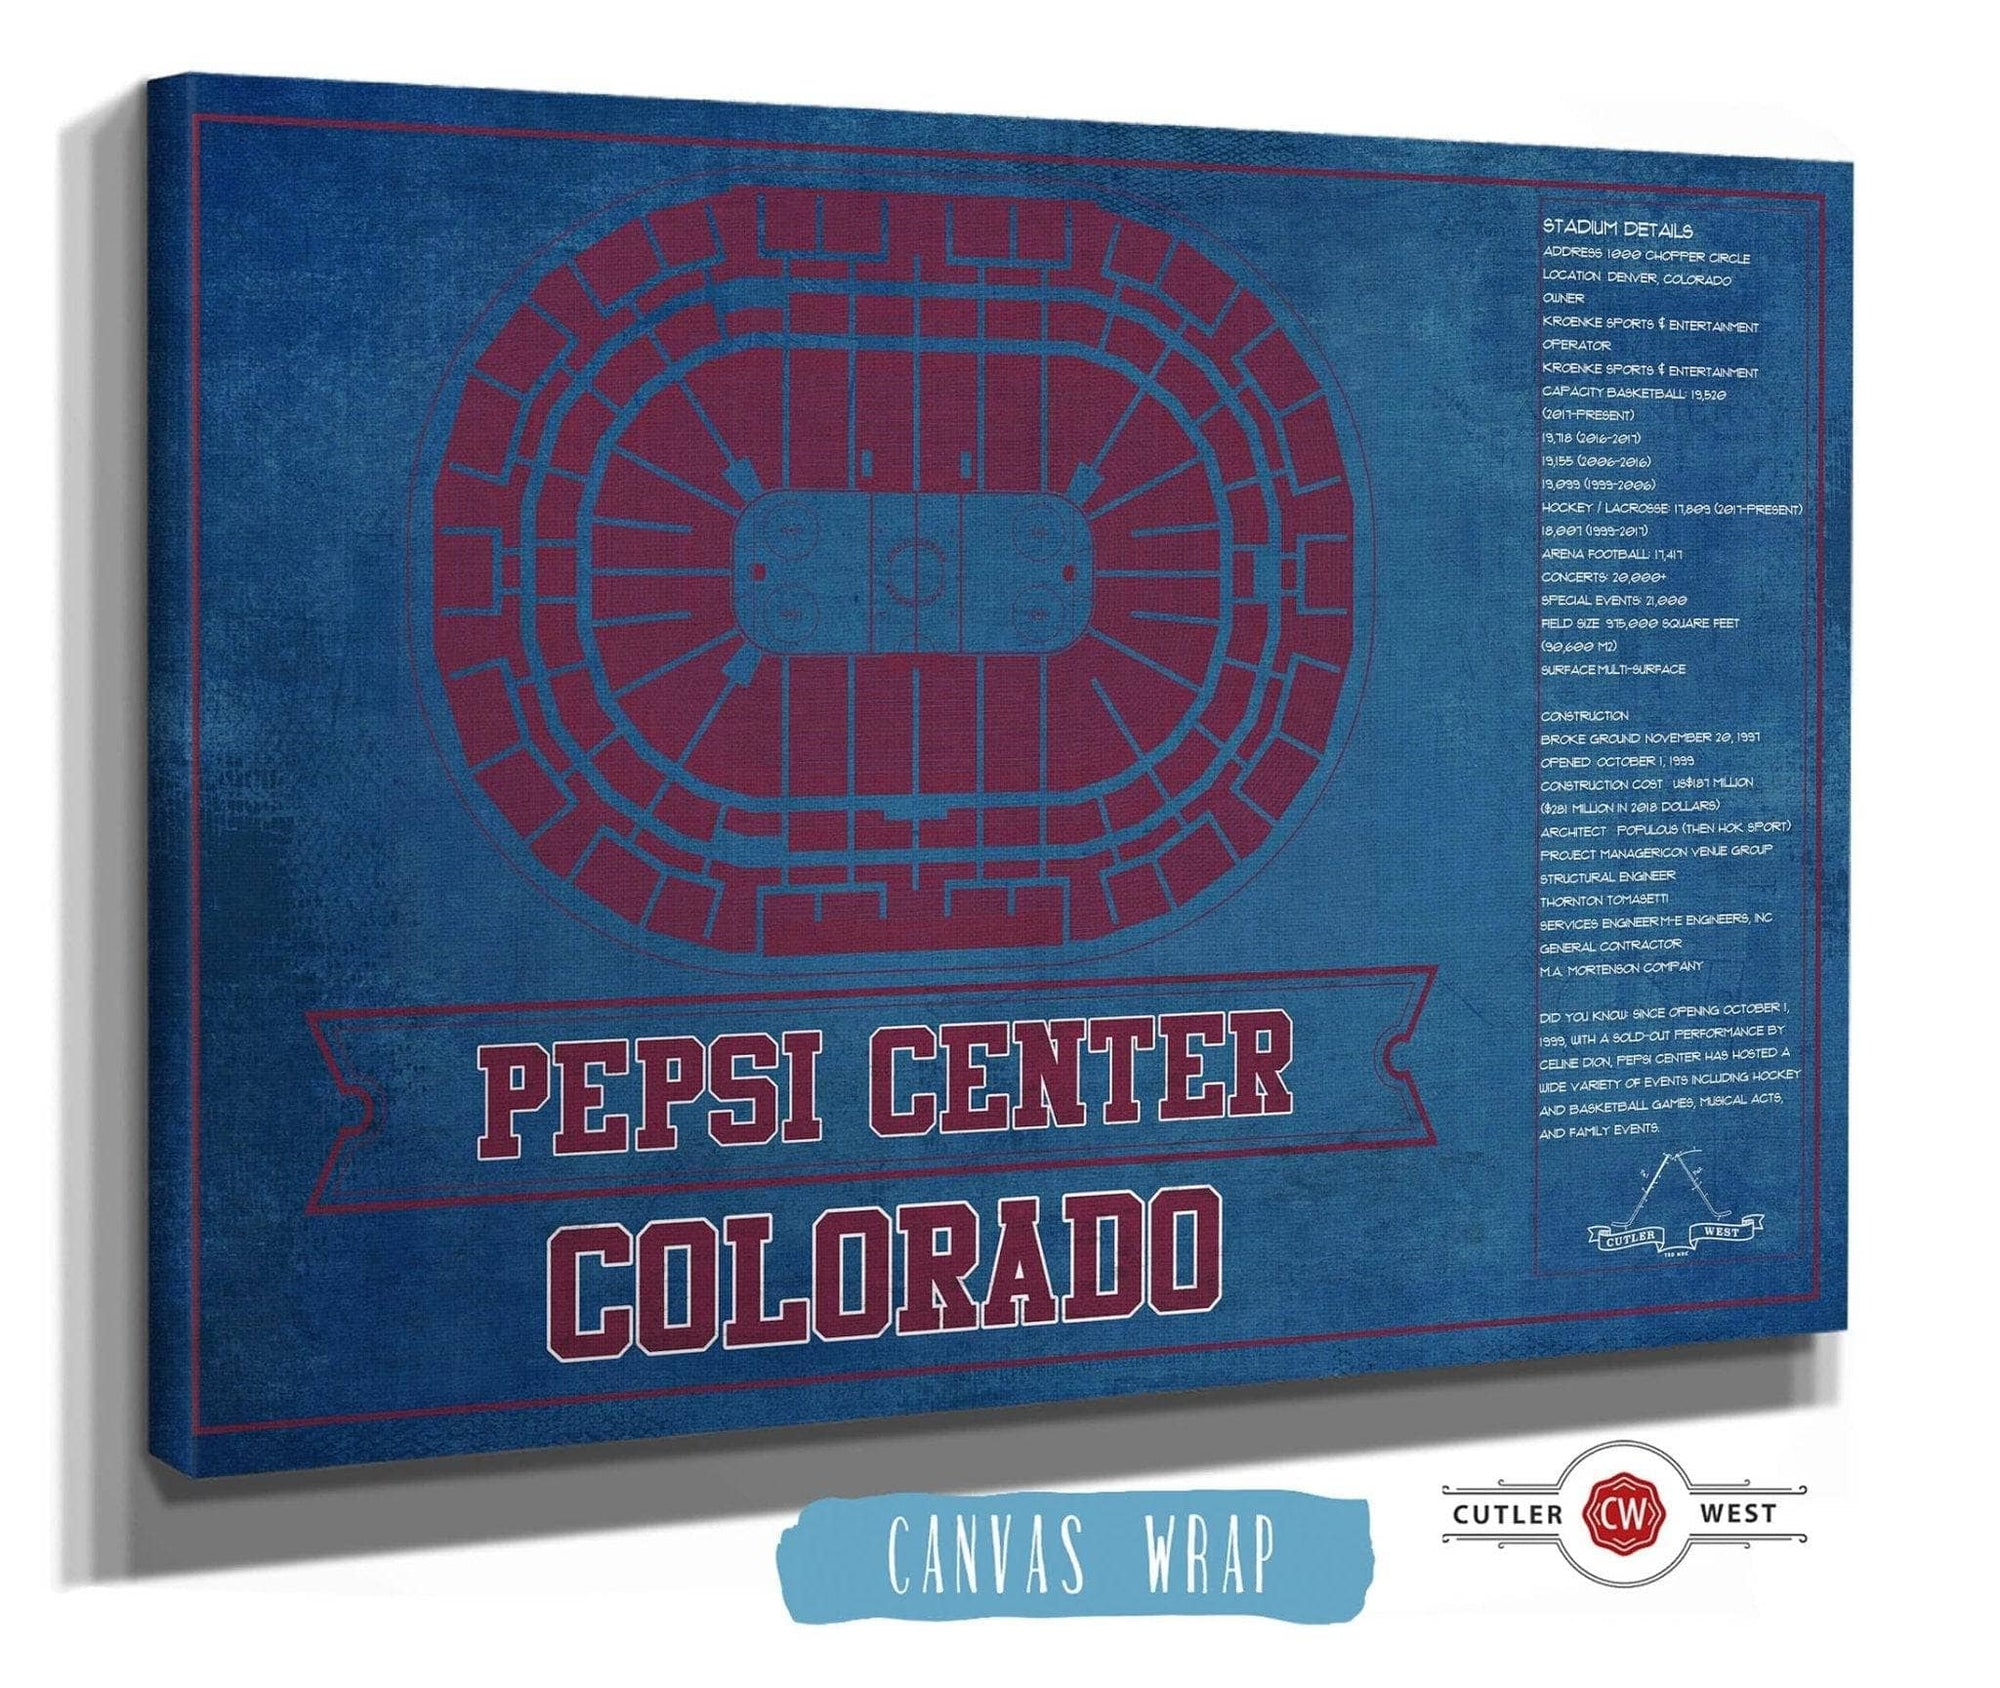 Cutler West 14" x 11" / Stretched Canvas Wrap Colorado Avalanche Pepsi Center Seating Chart - Vintage Hockey Print 673820545-TEAM